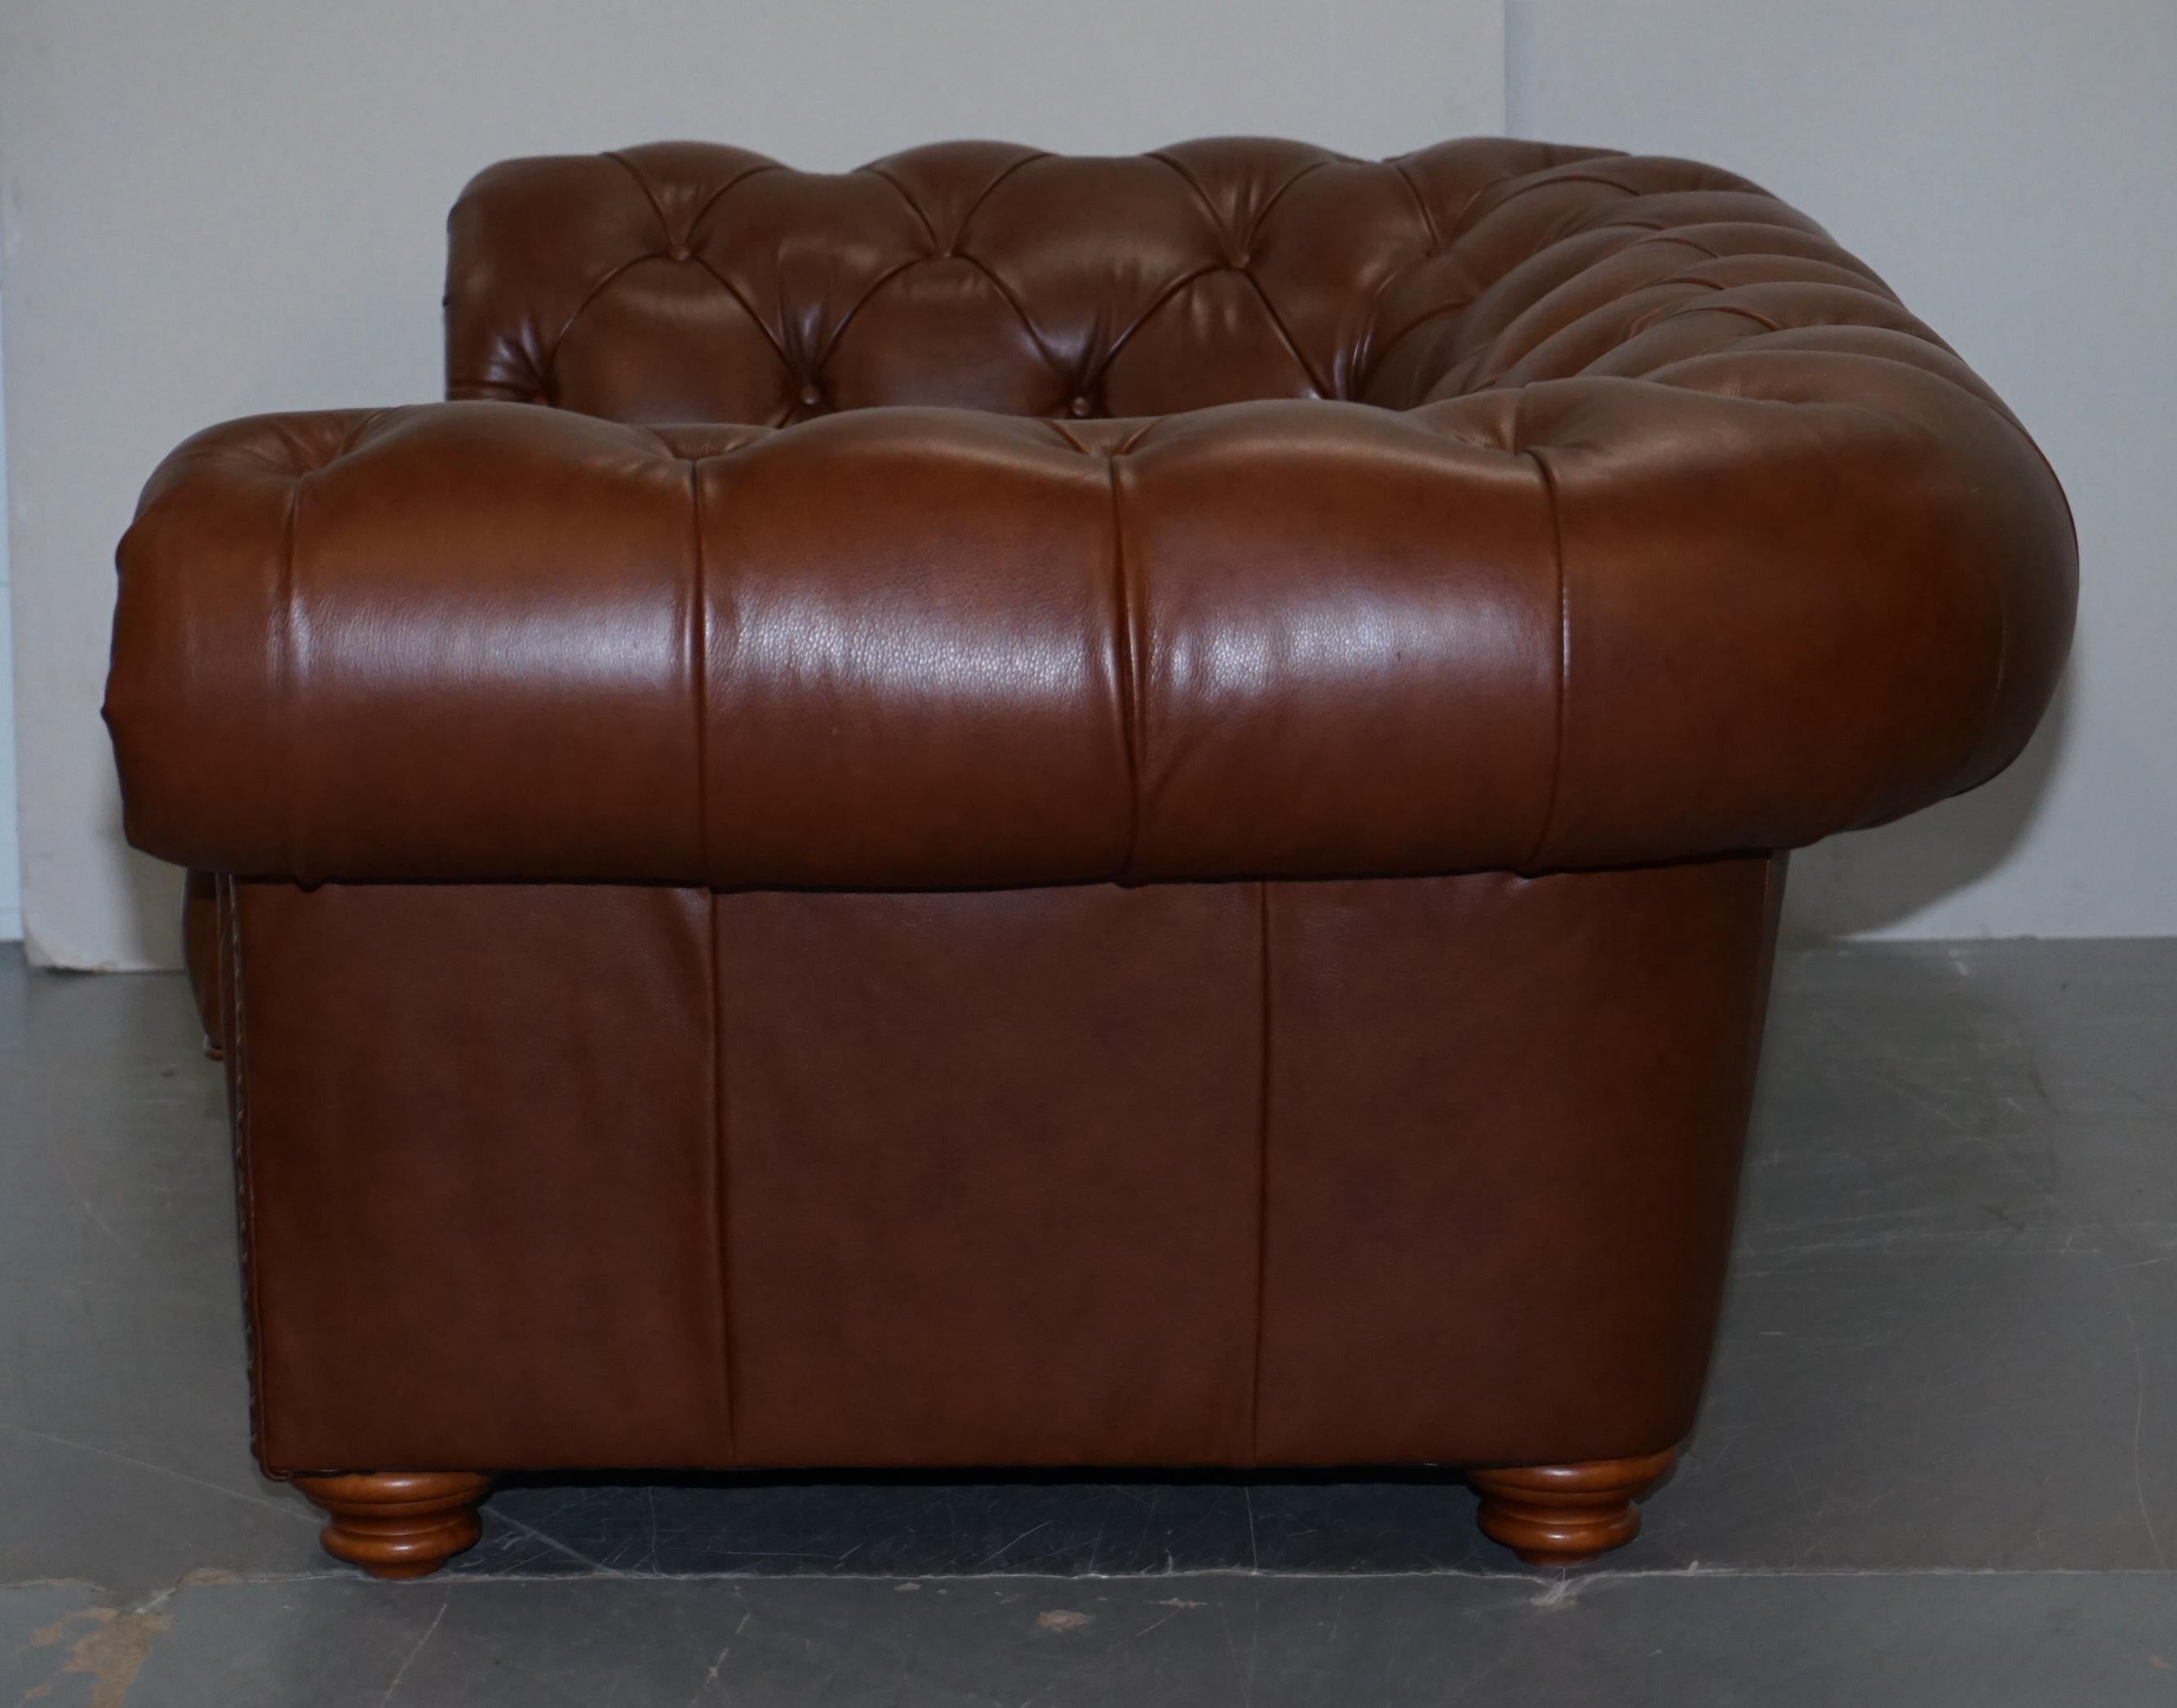 Medium Tetrad Made in England Brown Leather Chesterfield Sofa Part of Full Suite 6